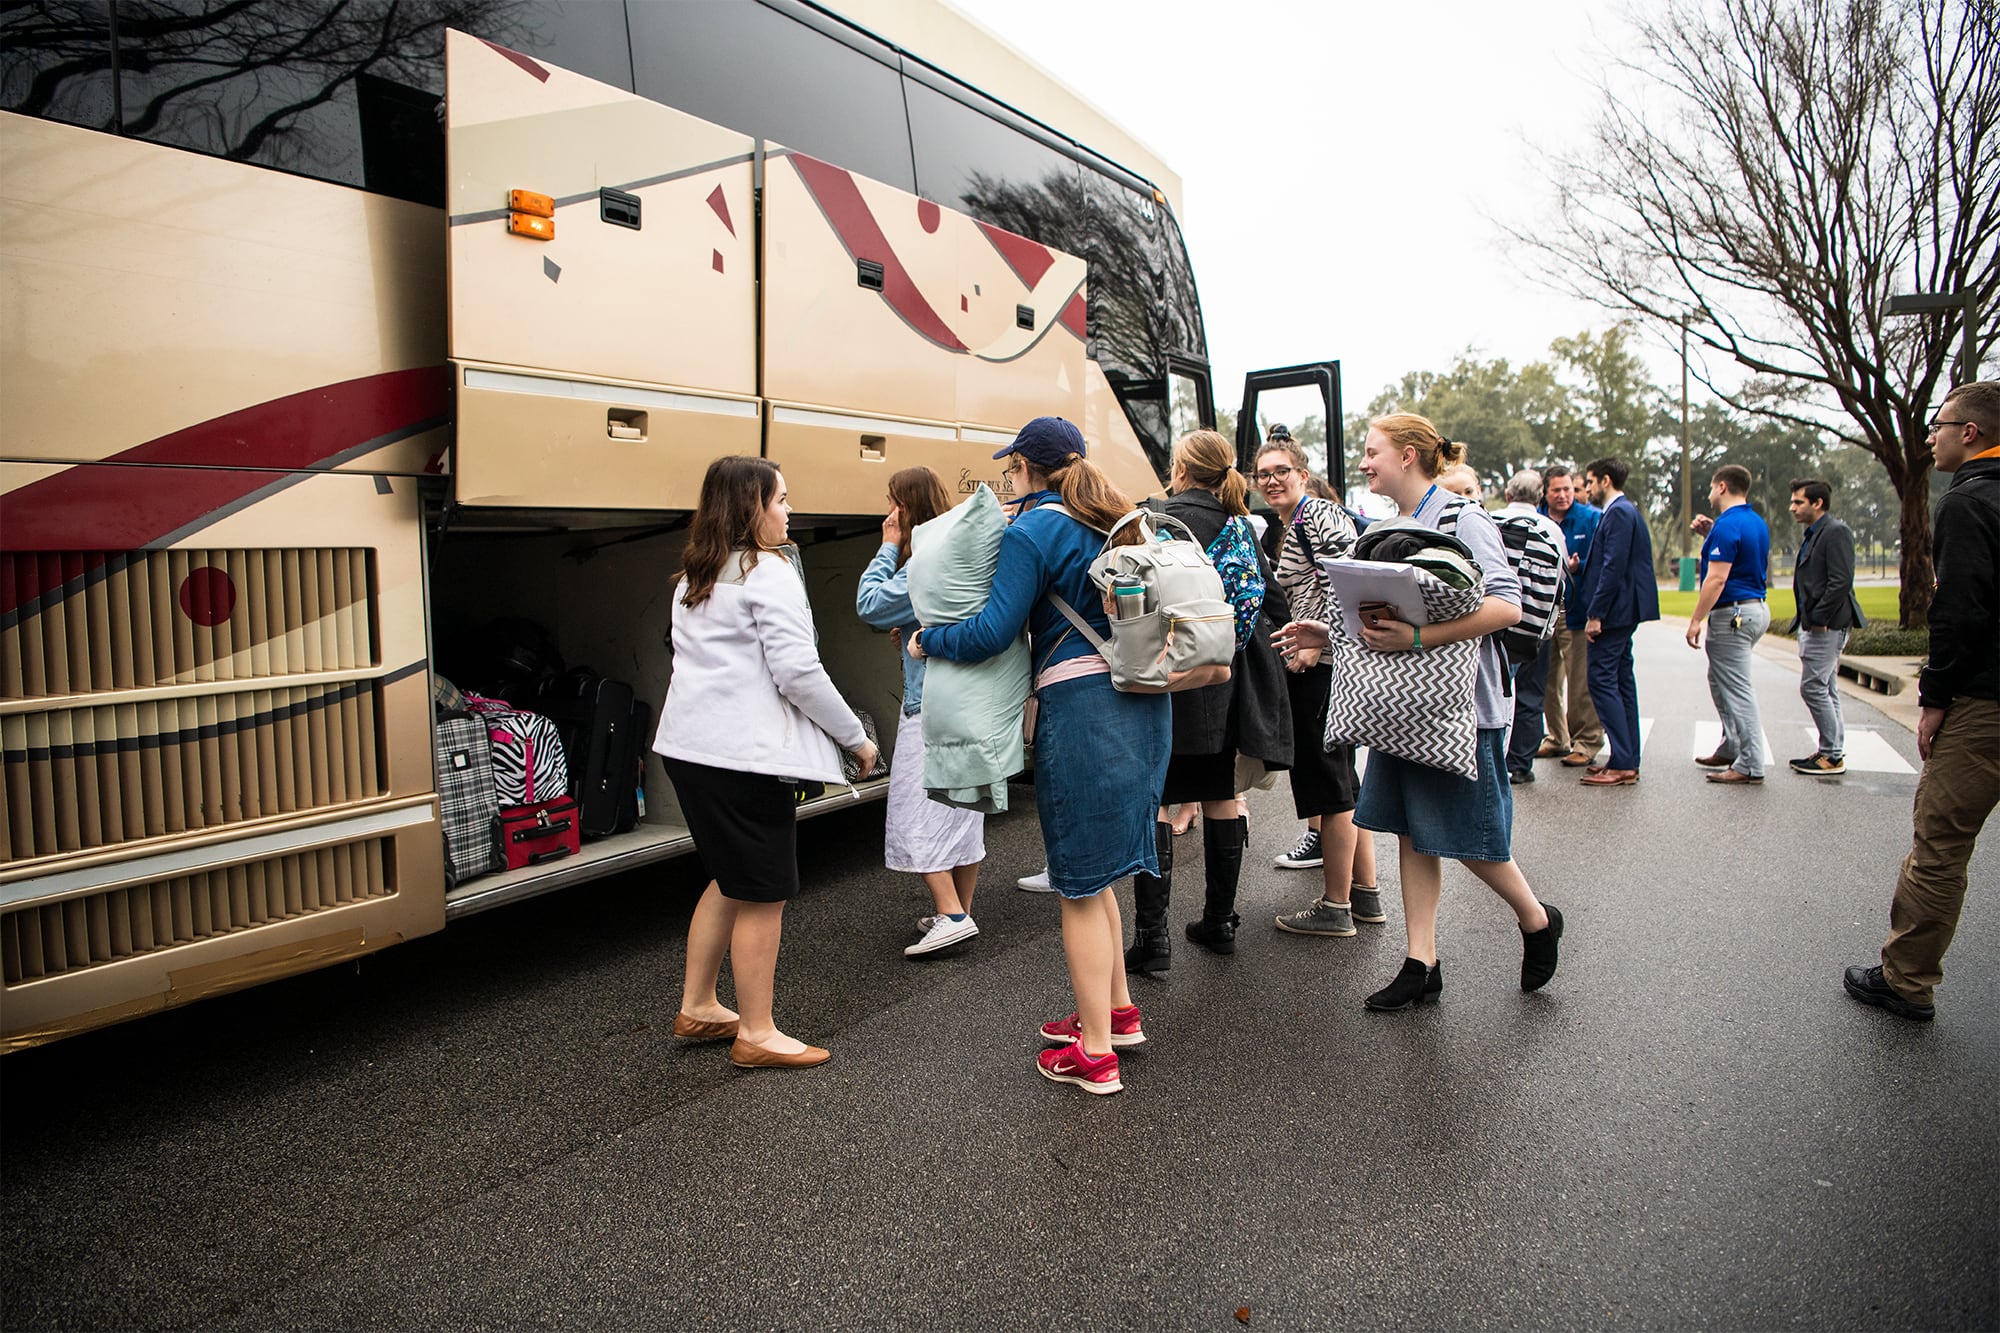 Students unloading a bus after arriving for College Getaway. 